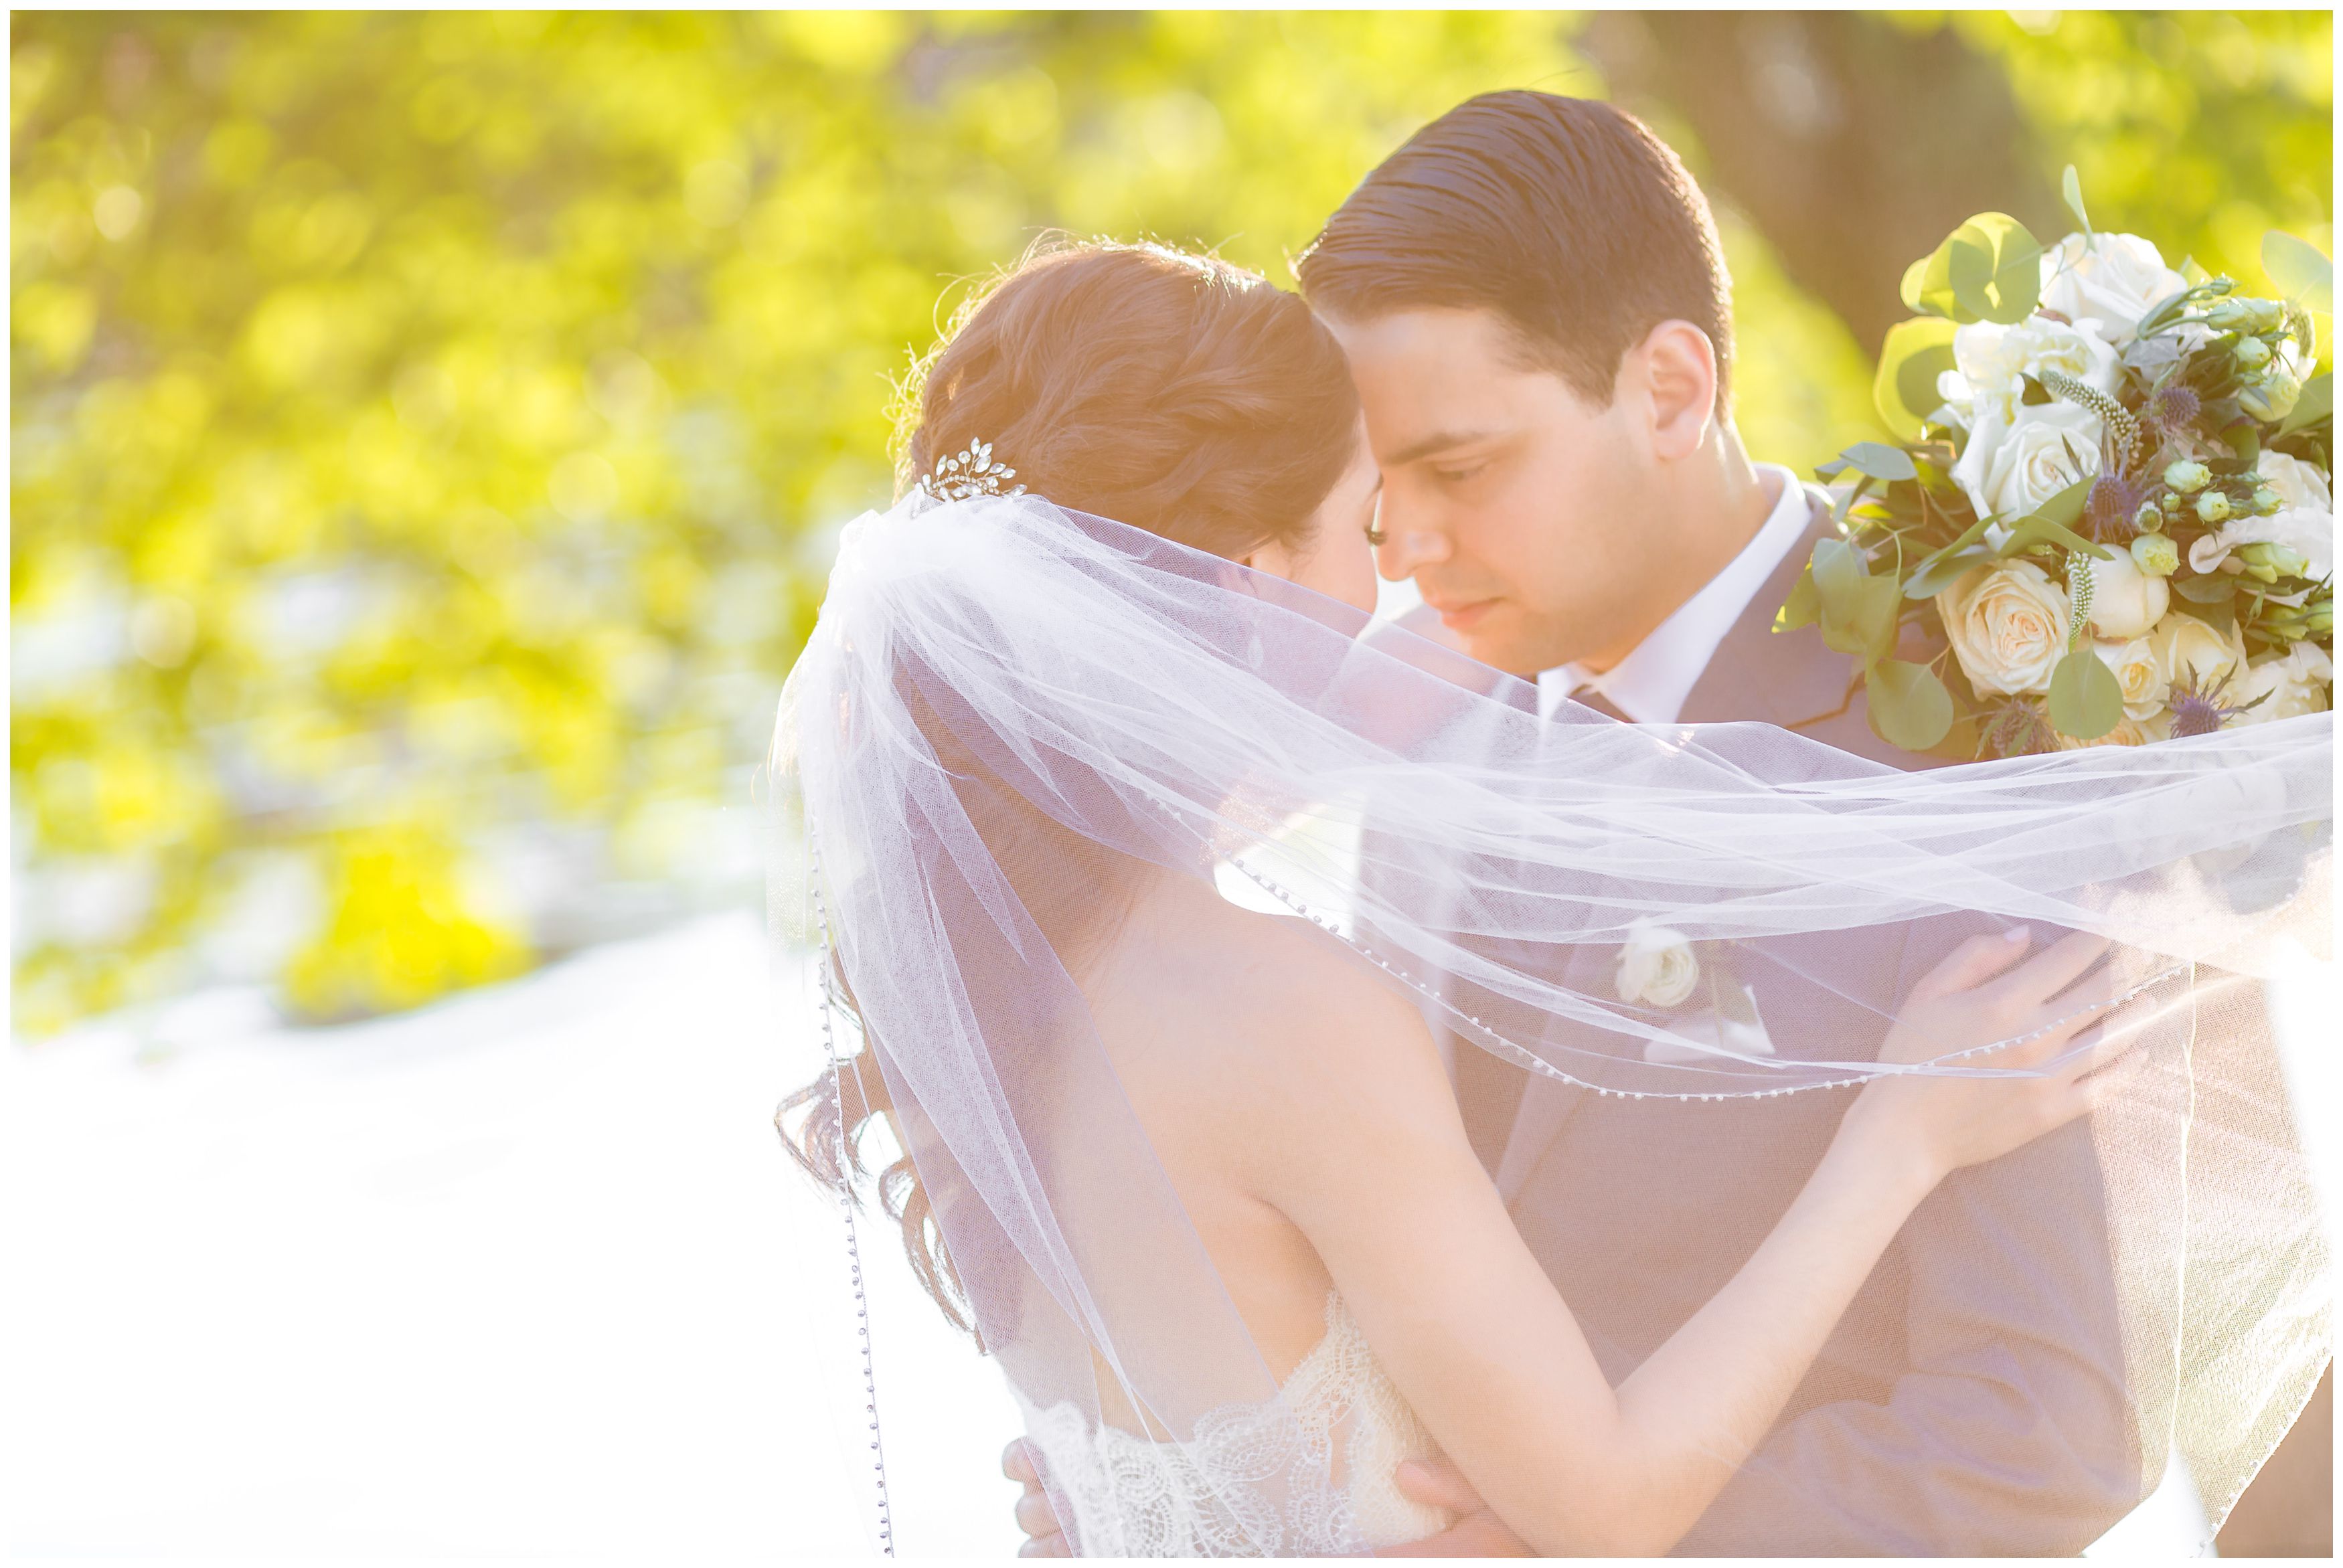 Bride and groom portraits at outdoor lakeside wedding